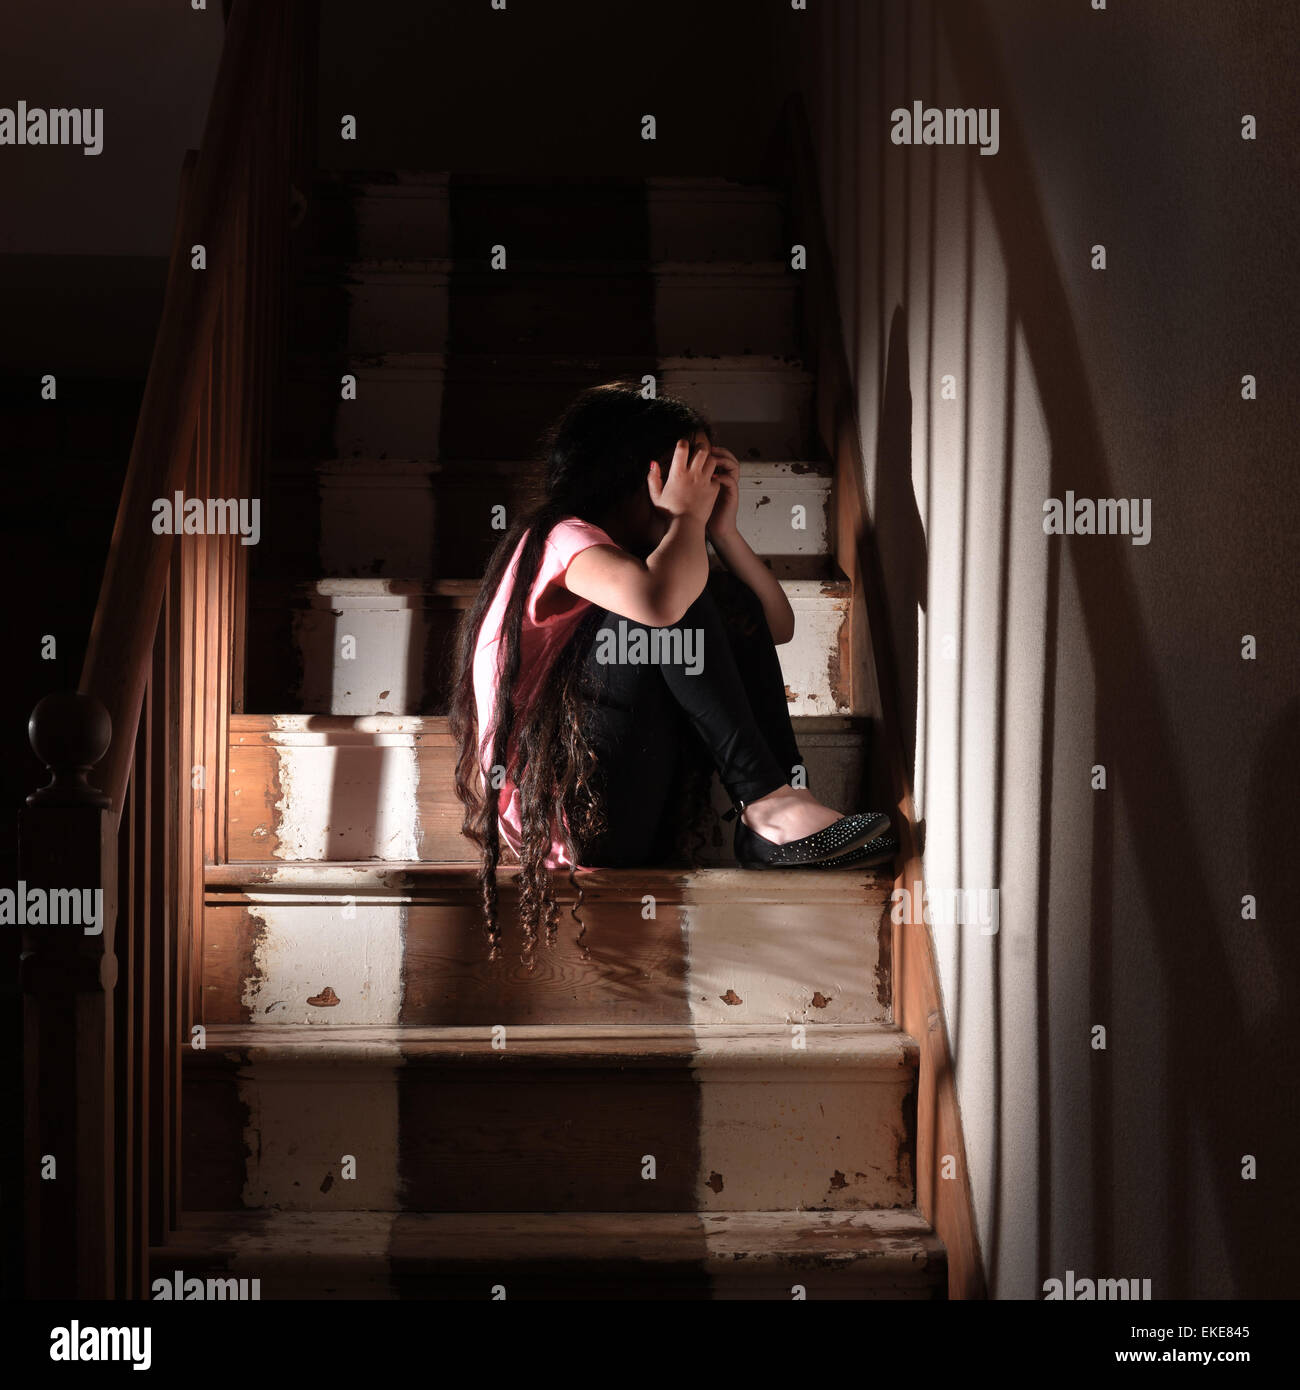 A young child on the stairs at home after suffering abuse. Posed by a model Stock Photo